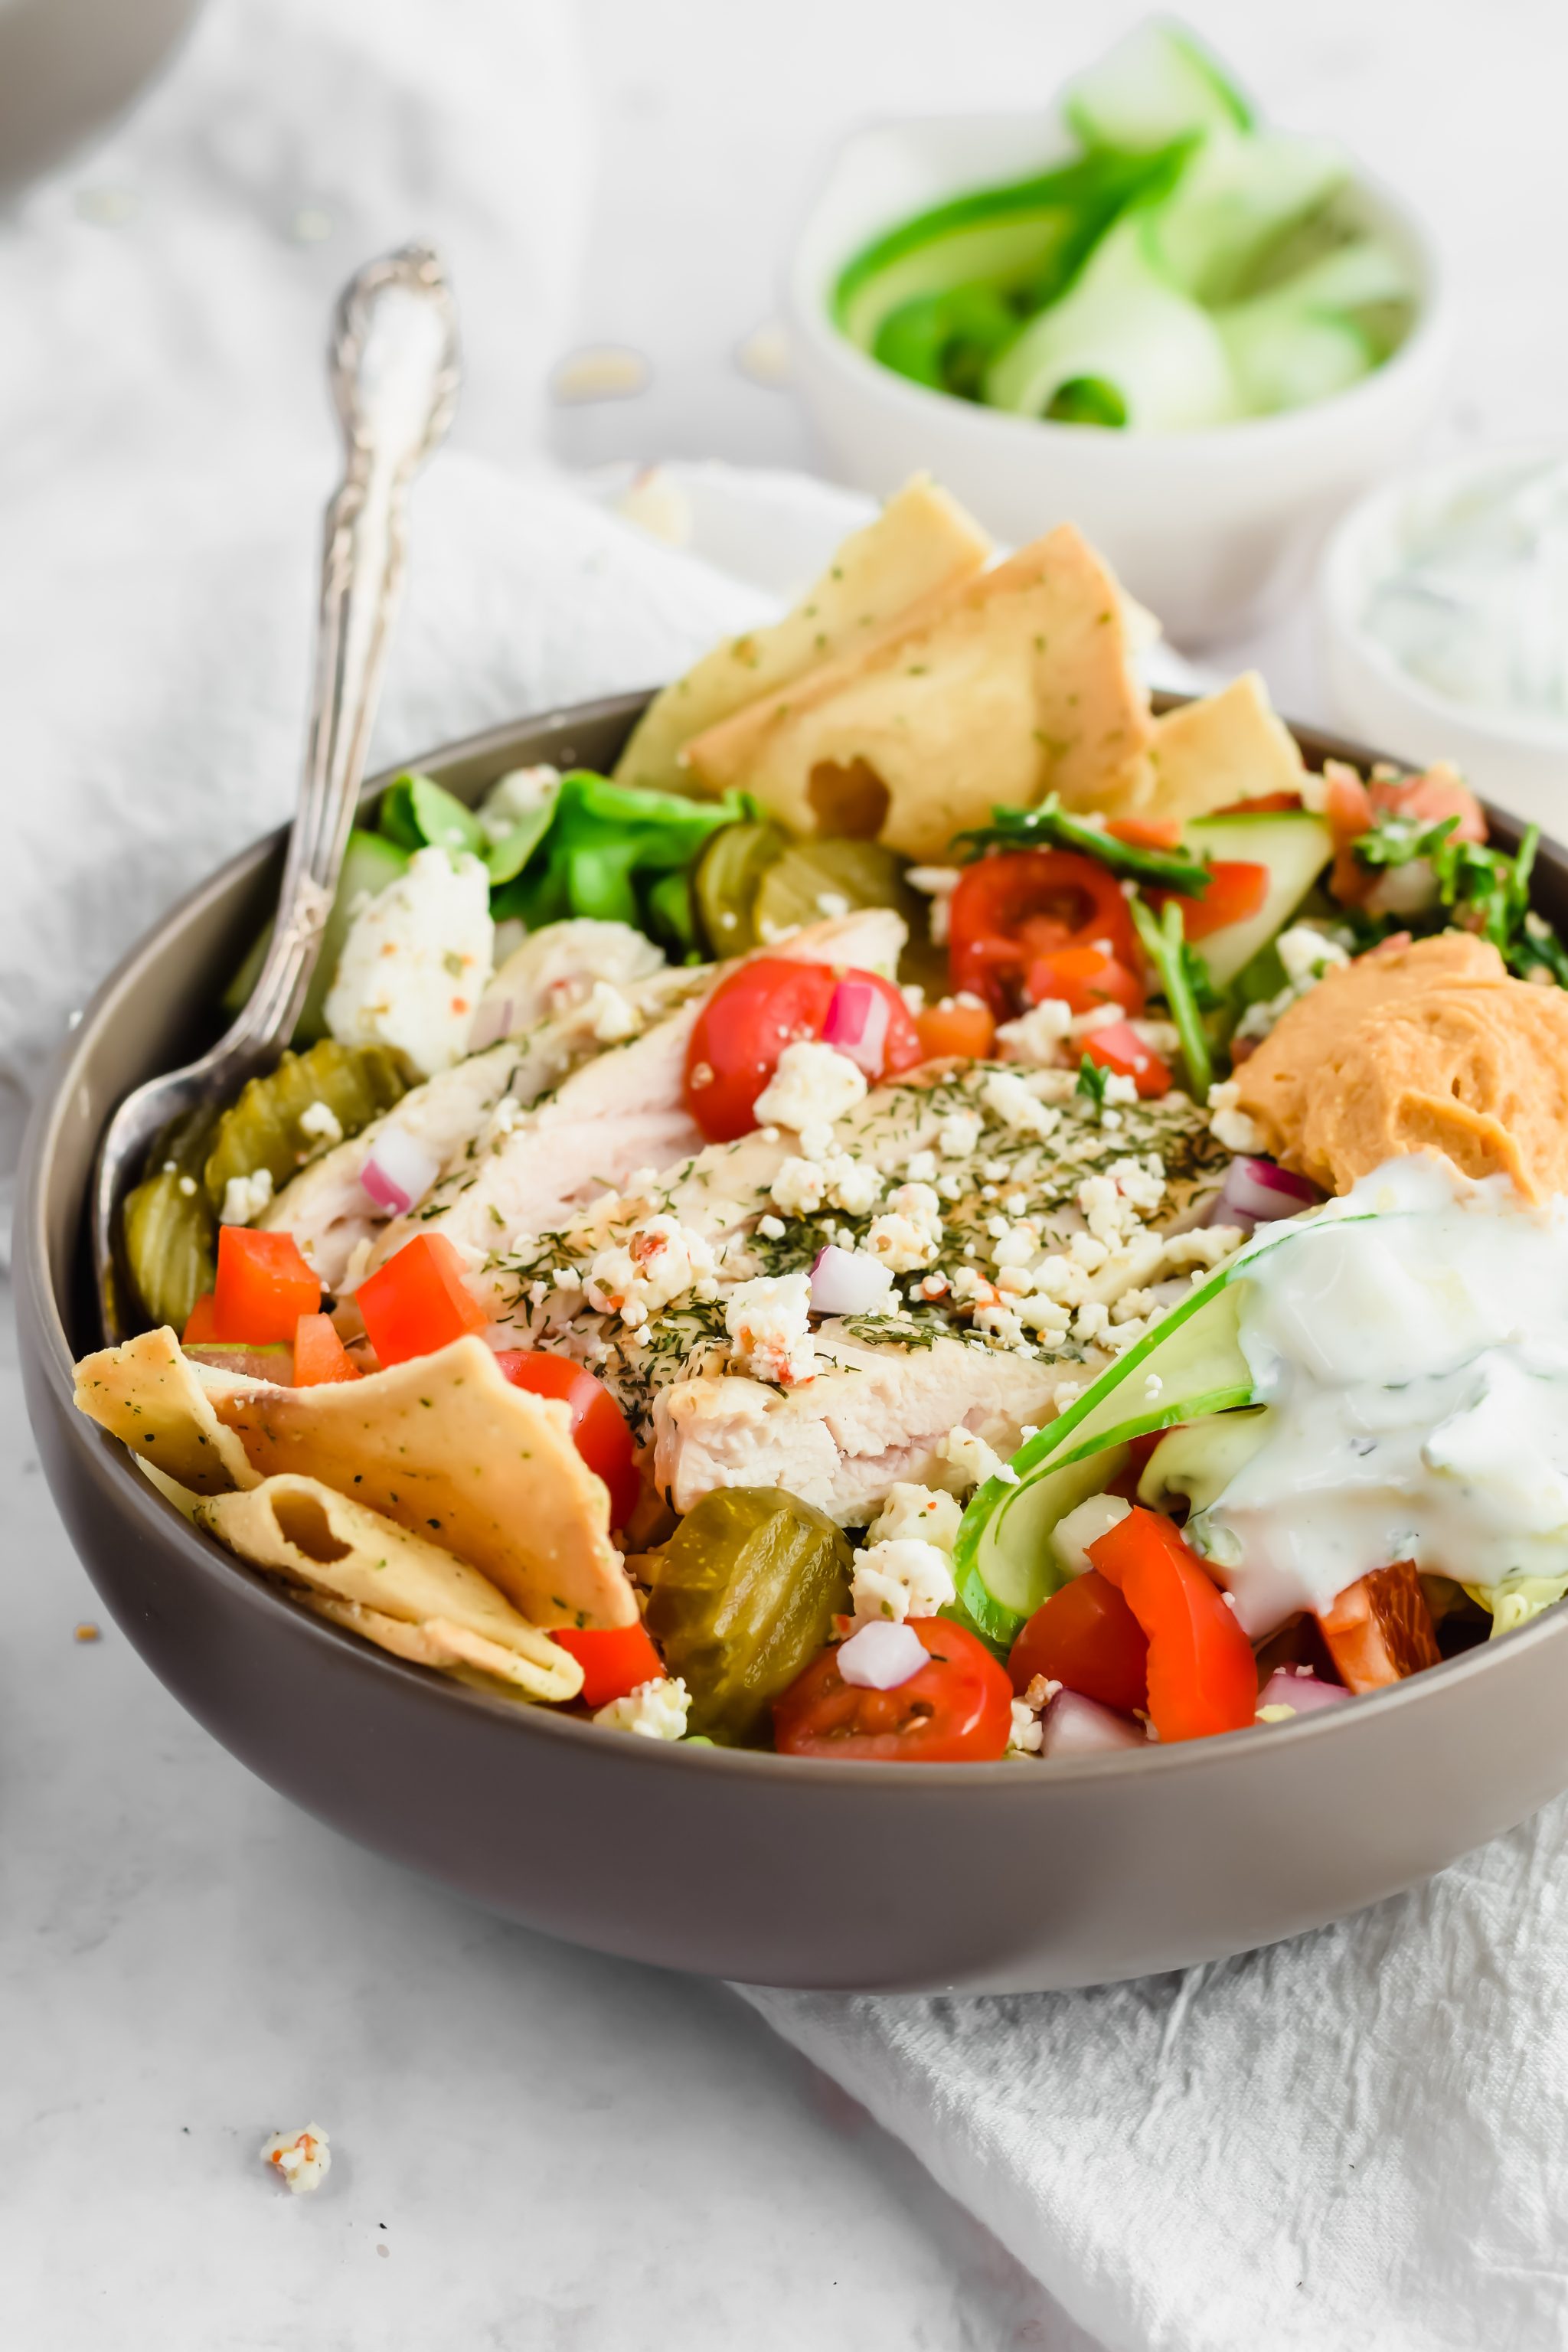 45 degree close up image of loaded salad bowl with sliced grilled chicken, pita chips, tomatoes, red onions, pickles, dollop of hummus, tabbouleh, and tzatziki dressing